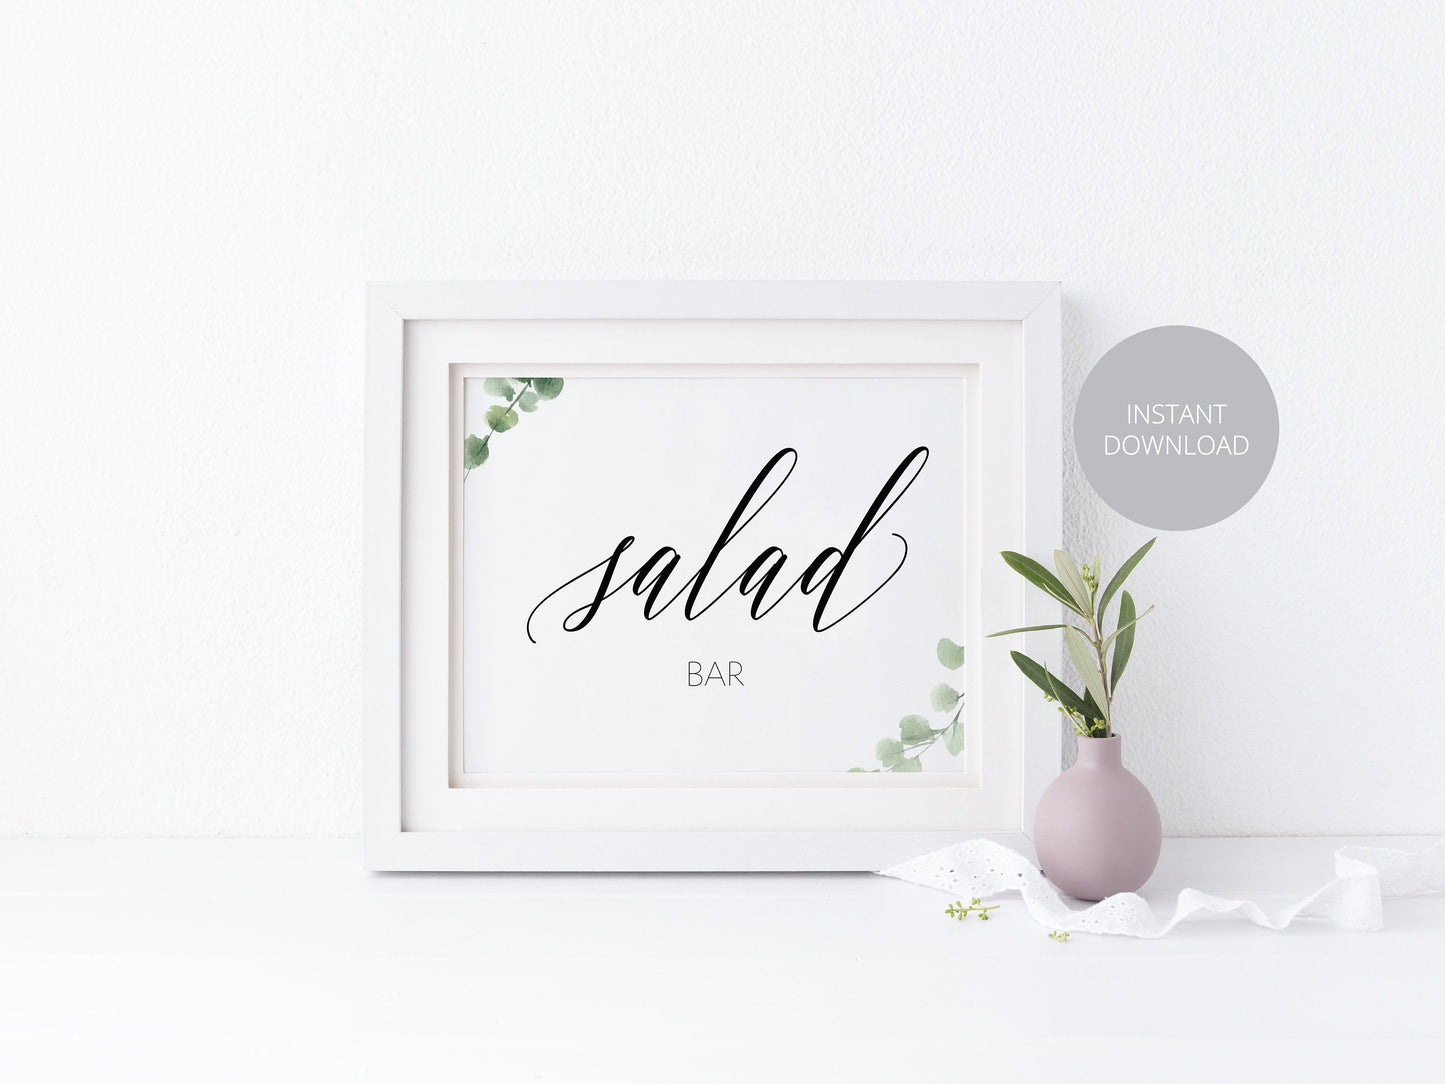 Wedding Salad Bar Sign, Wedding Bar Sign, Wedding Food Sign, Wedding Signage, Wedding, Wedding Decor, Instant Download SIGNS | PHOTO BOOTH SAVVY PAPER CO